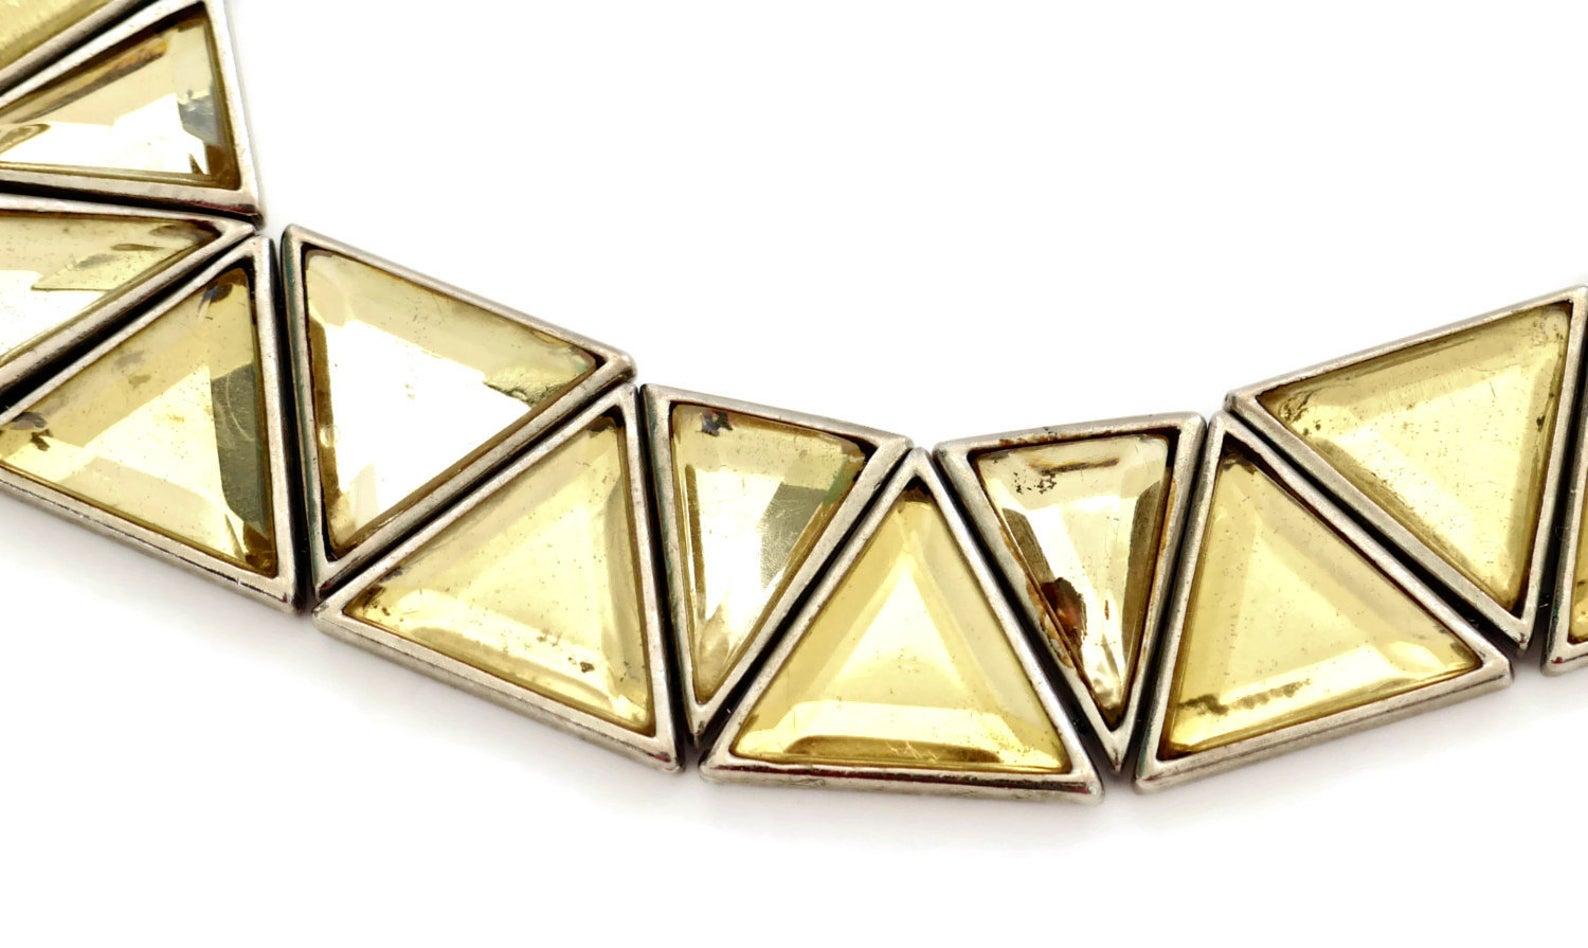 Vintage YVES SAINT LAURENT Resin Geometric Necklace by Robert Goossens In Good Condition For Sale In Kingersheim, Alsace